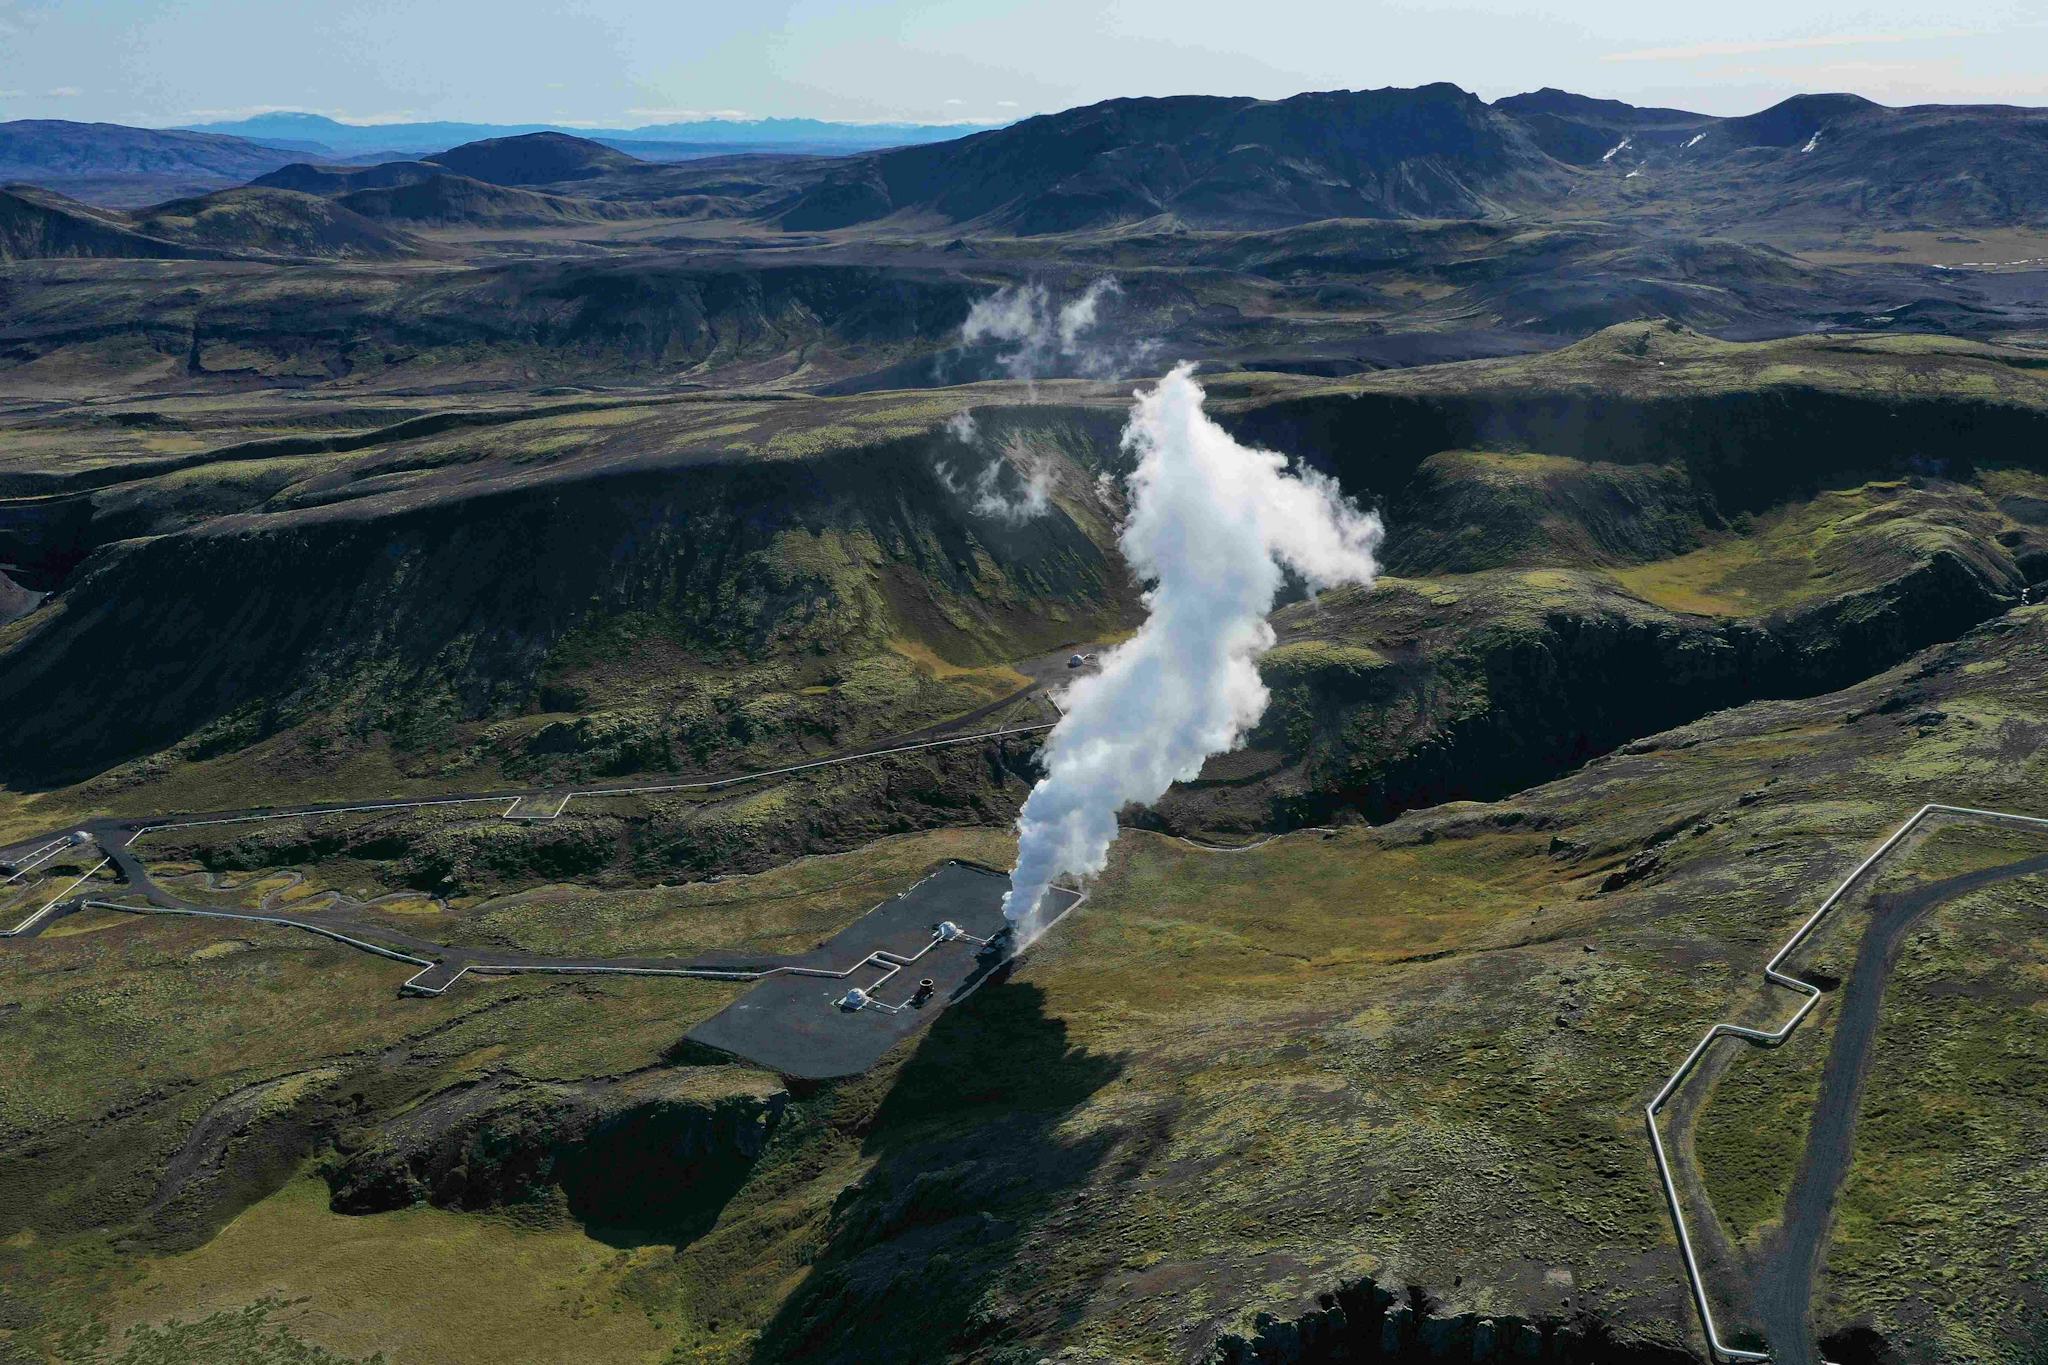 A geothermal area with steam rising from the ground